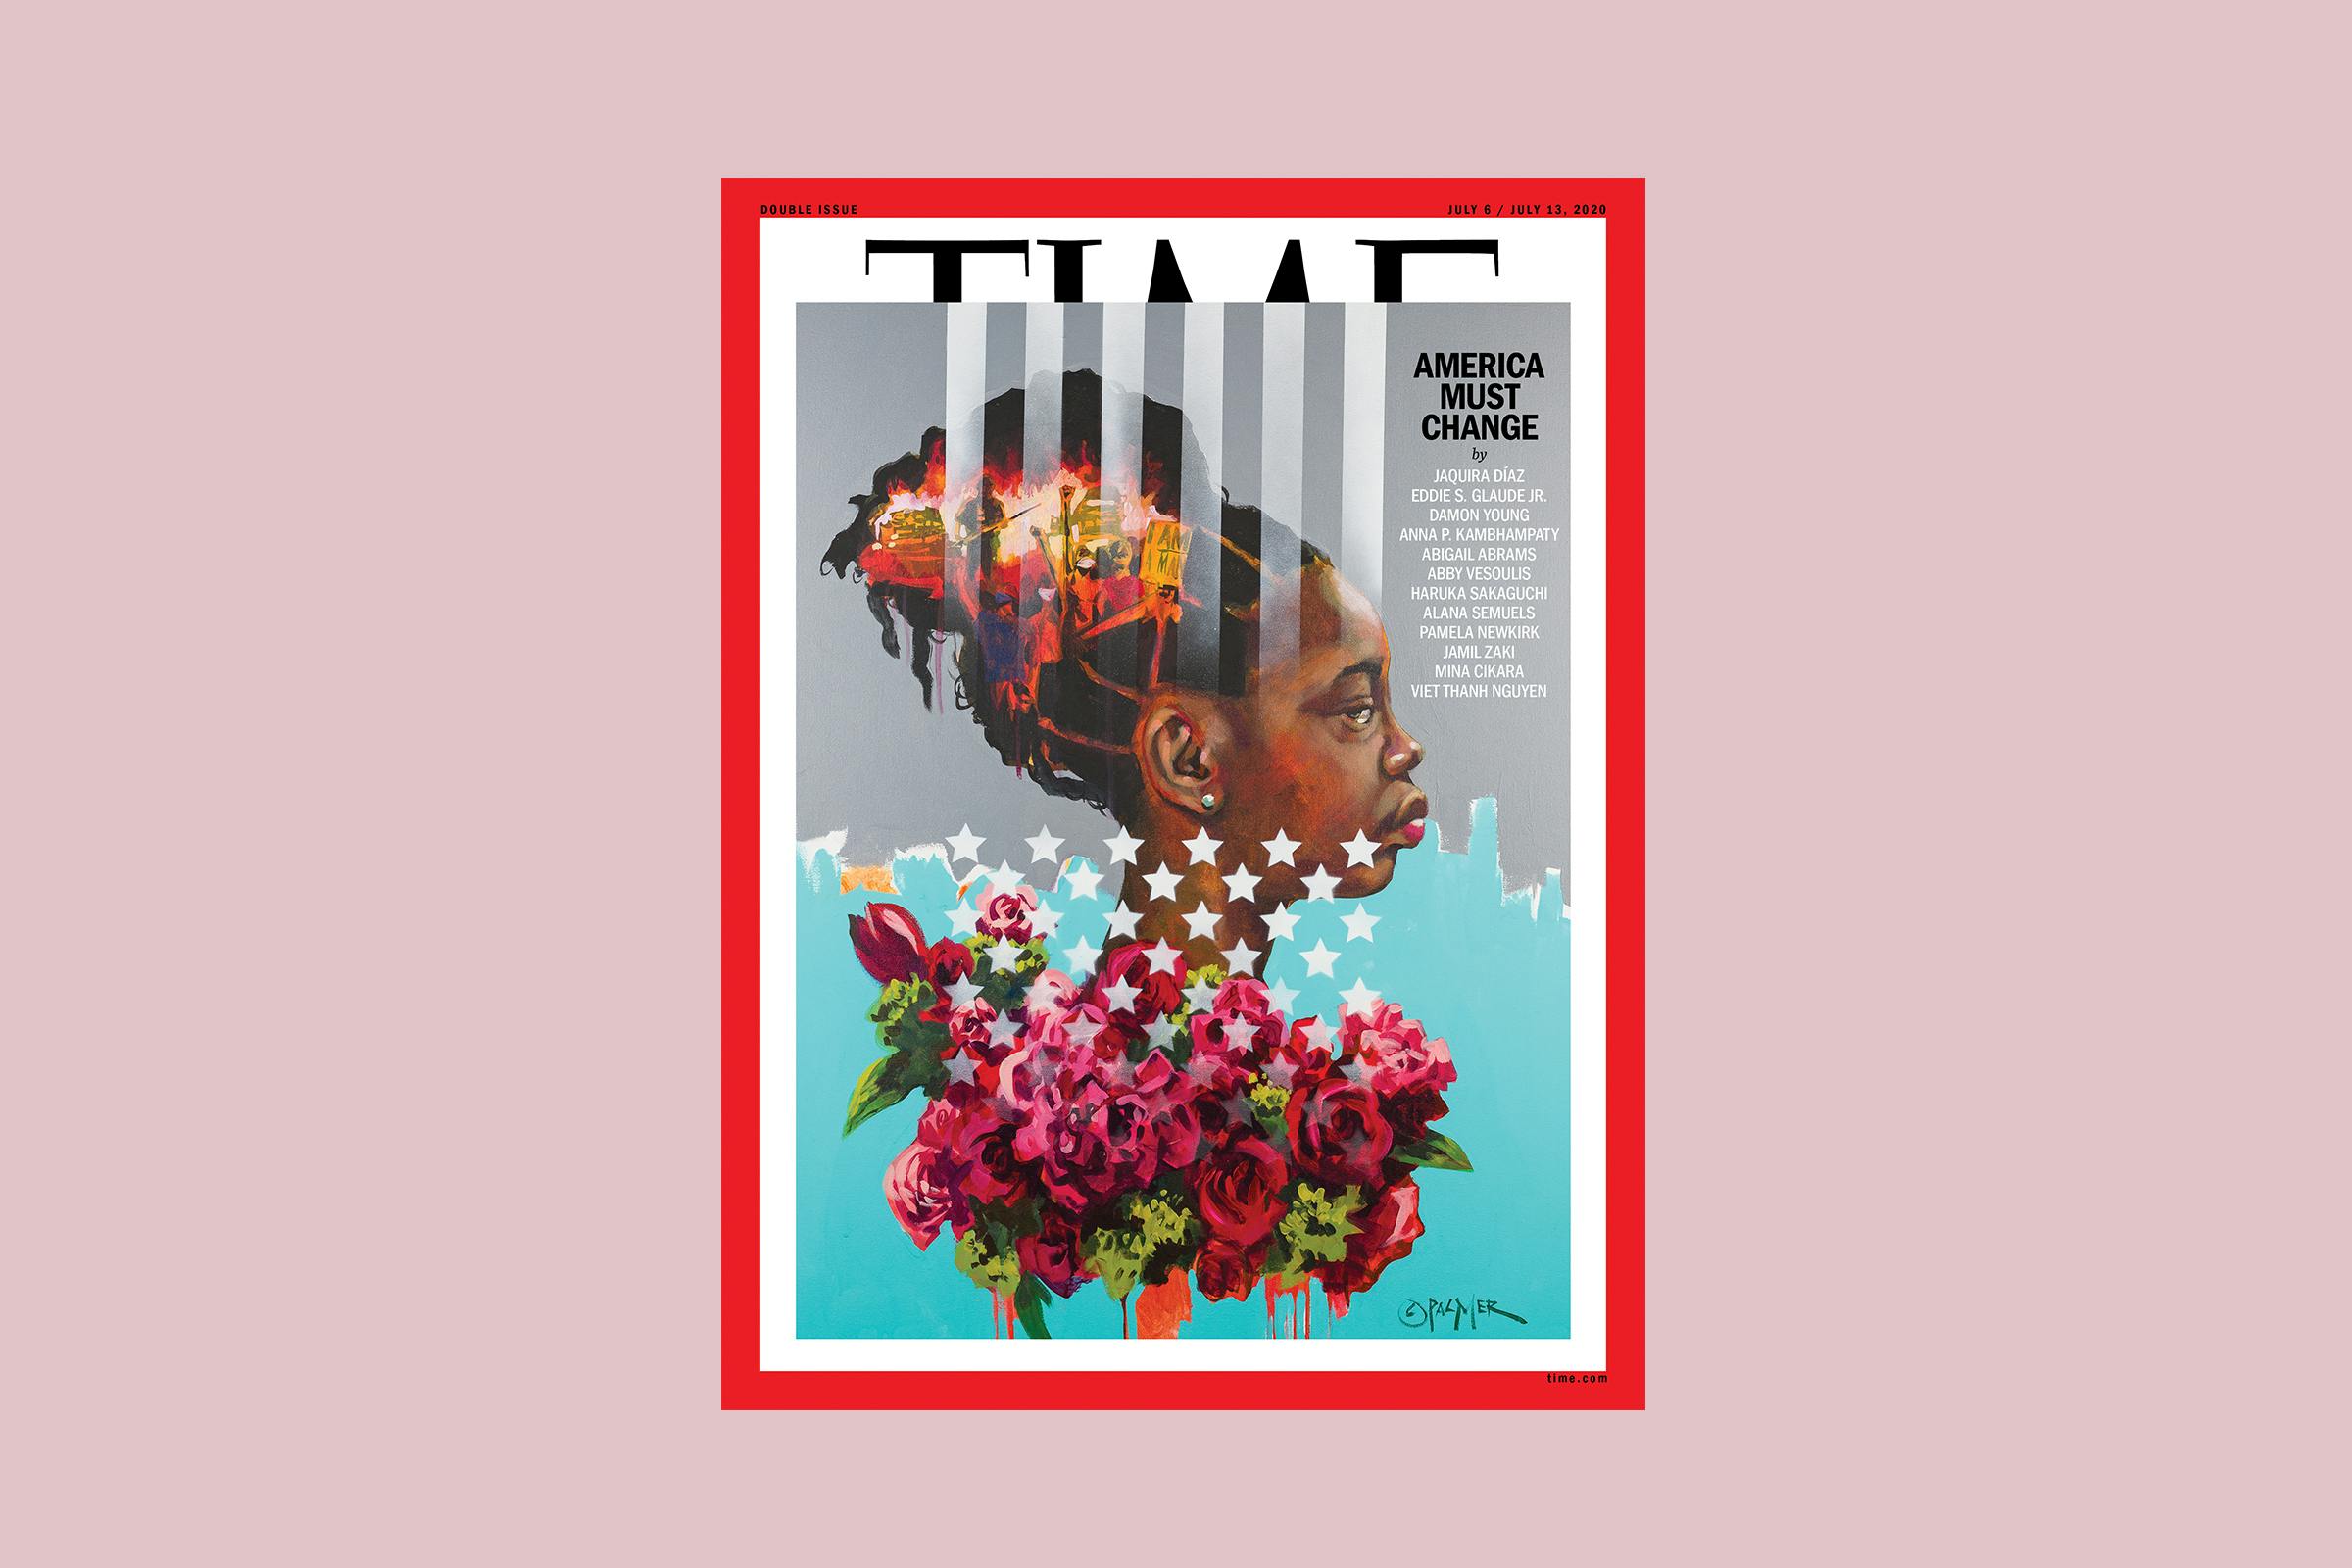 Time Magazine’s poignant new cover declares “America Must Change”